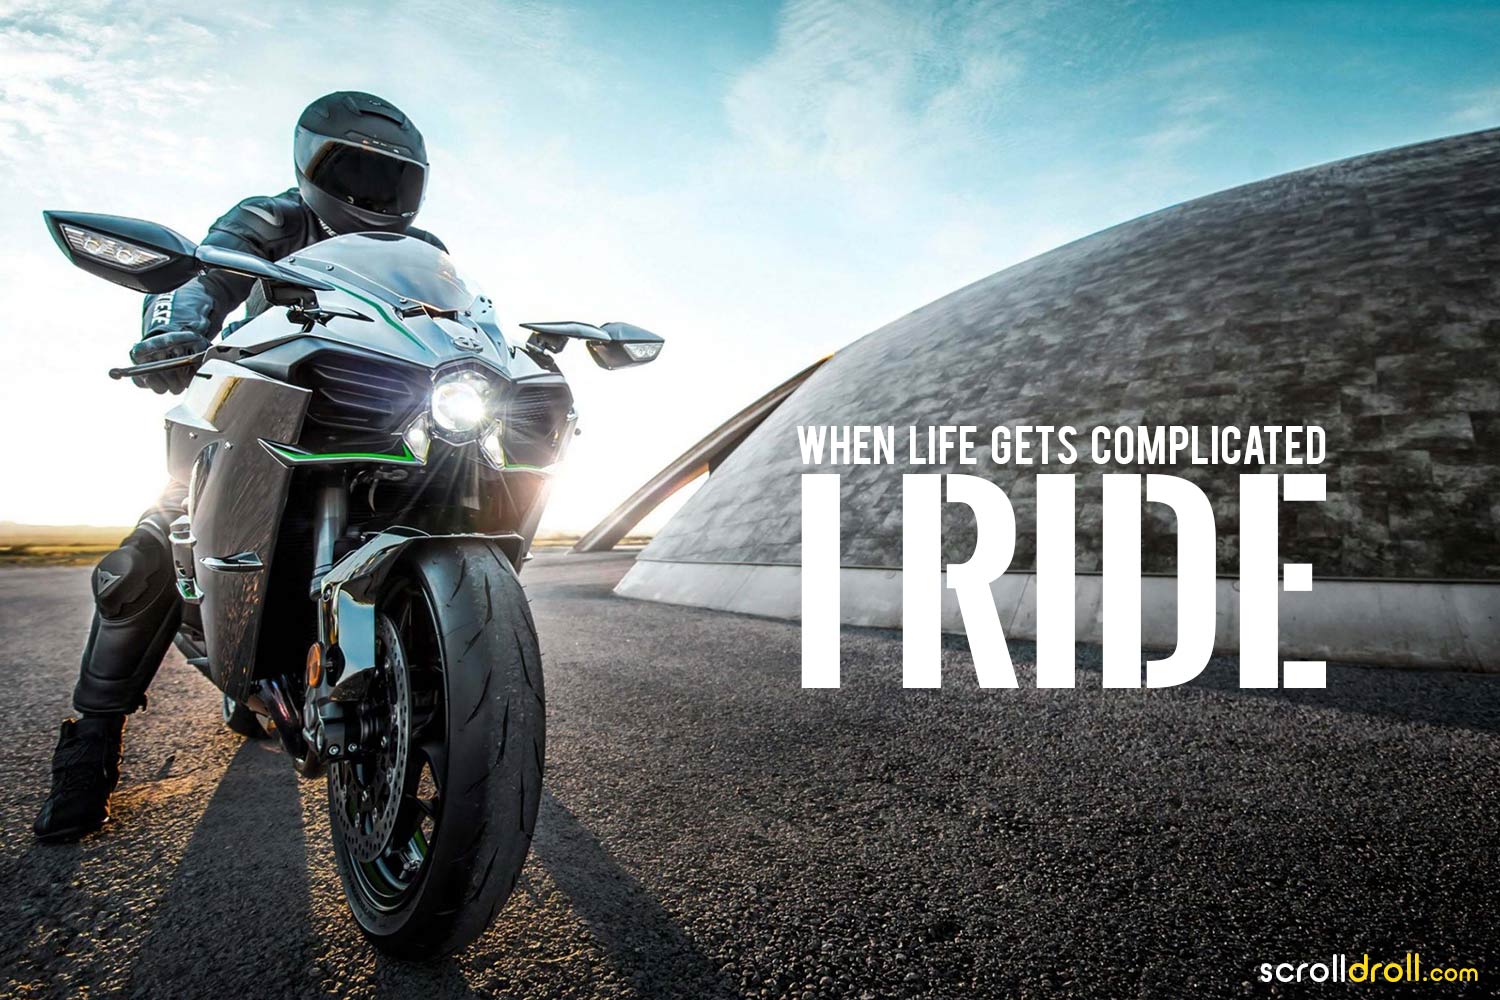 12 Quotes That Will Set Every Biker's Heart Racing